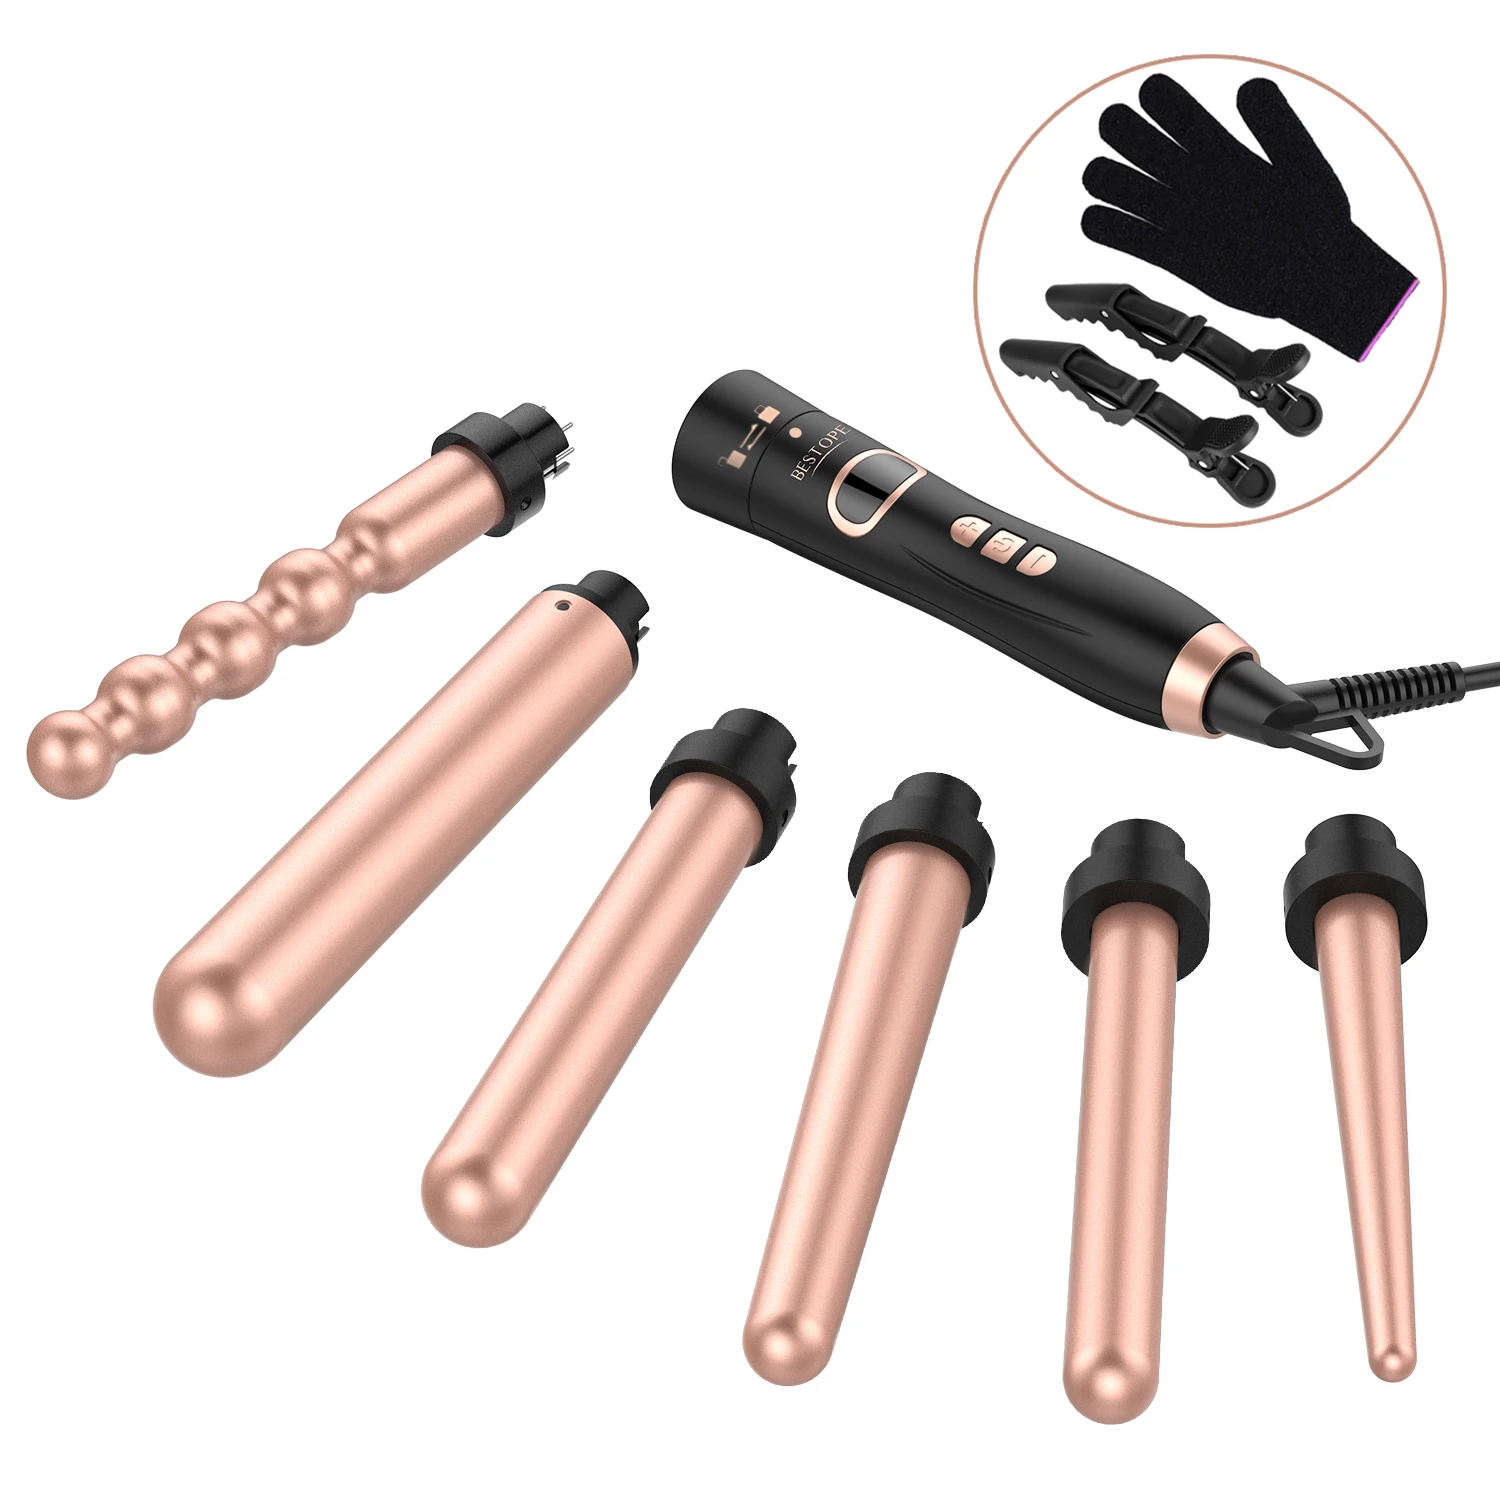 

OEM Ceramic Hair Curler Bestope Interchangeable 6 in 1 Wand Curling Iron Set for All Hair Types, Rose gold